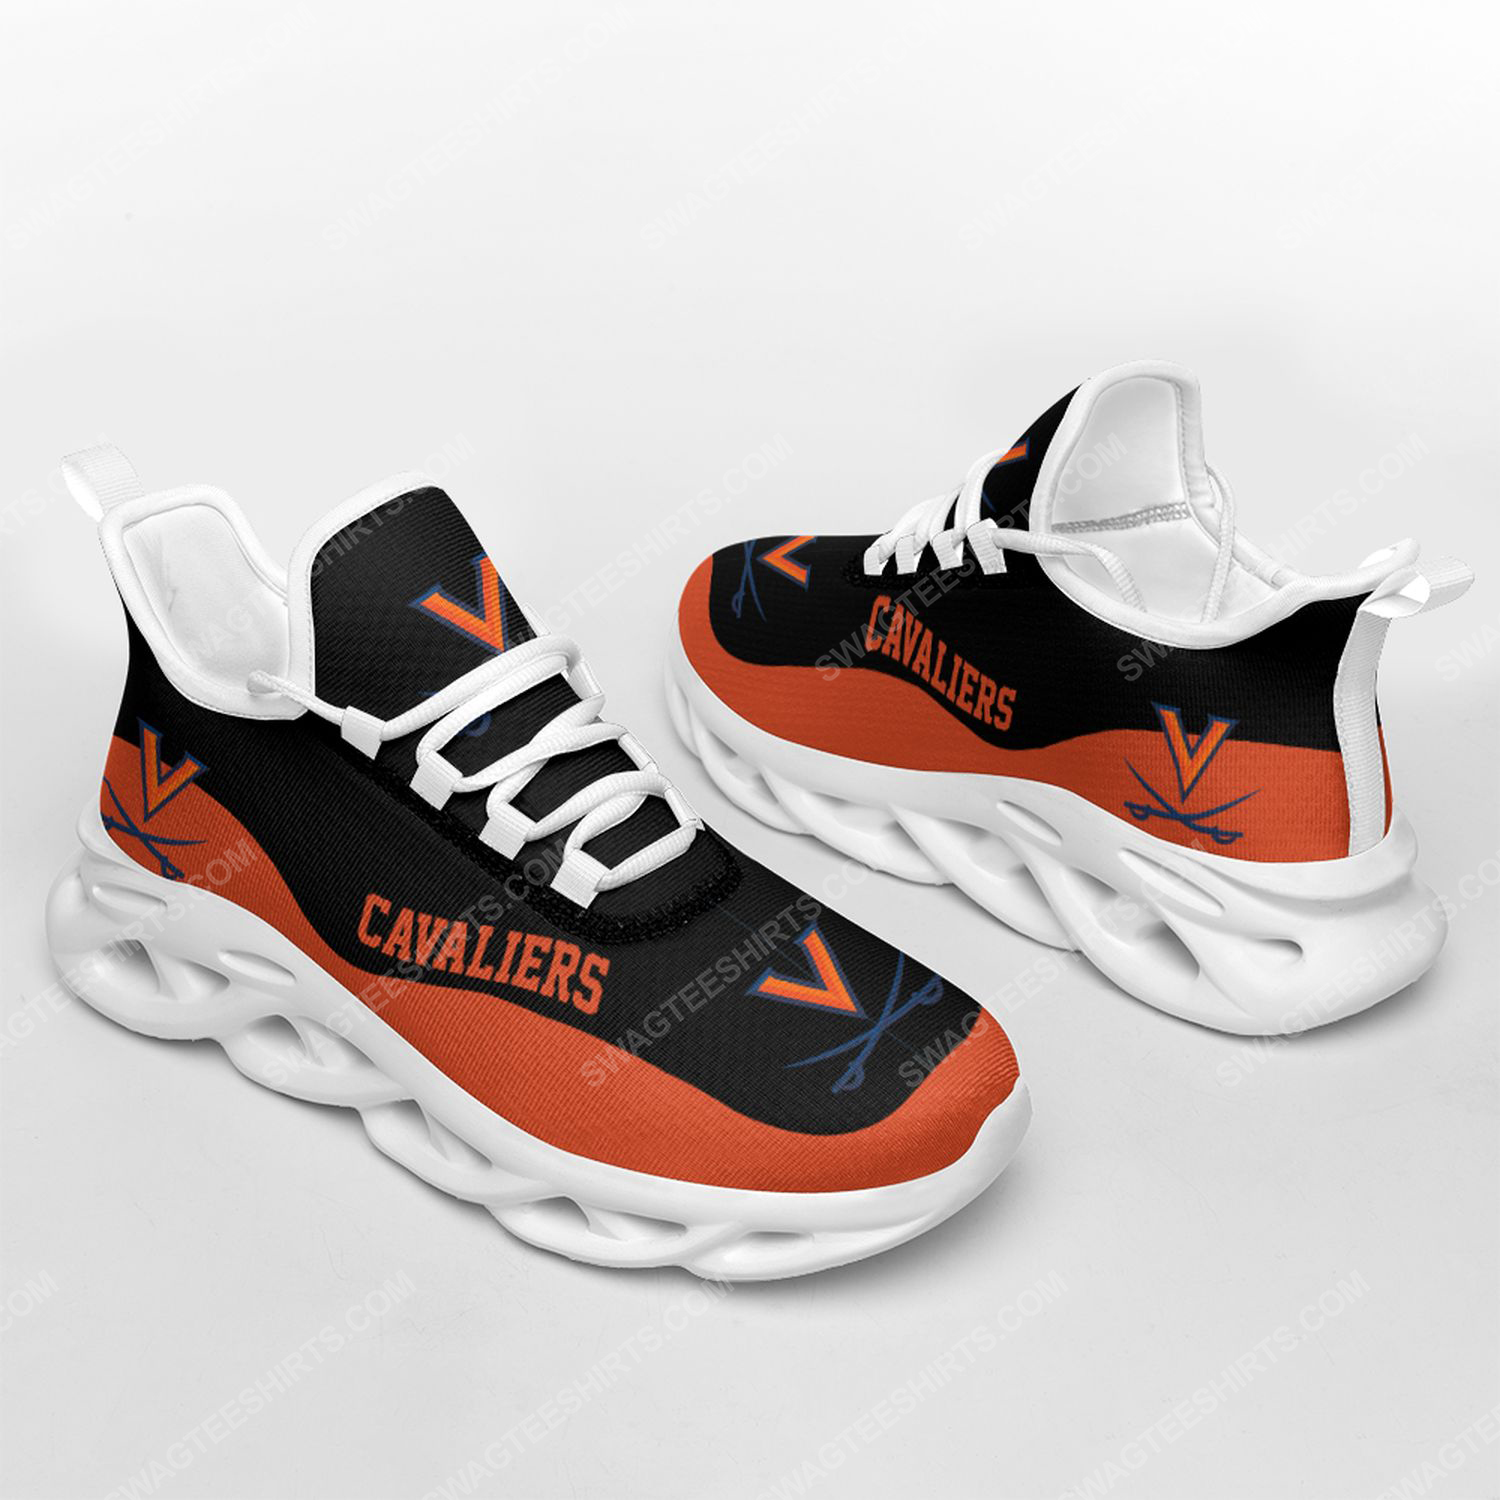 [special edition] The virginia cavaliers football team max soul shoes – Maria